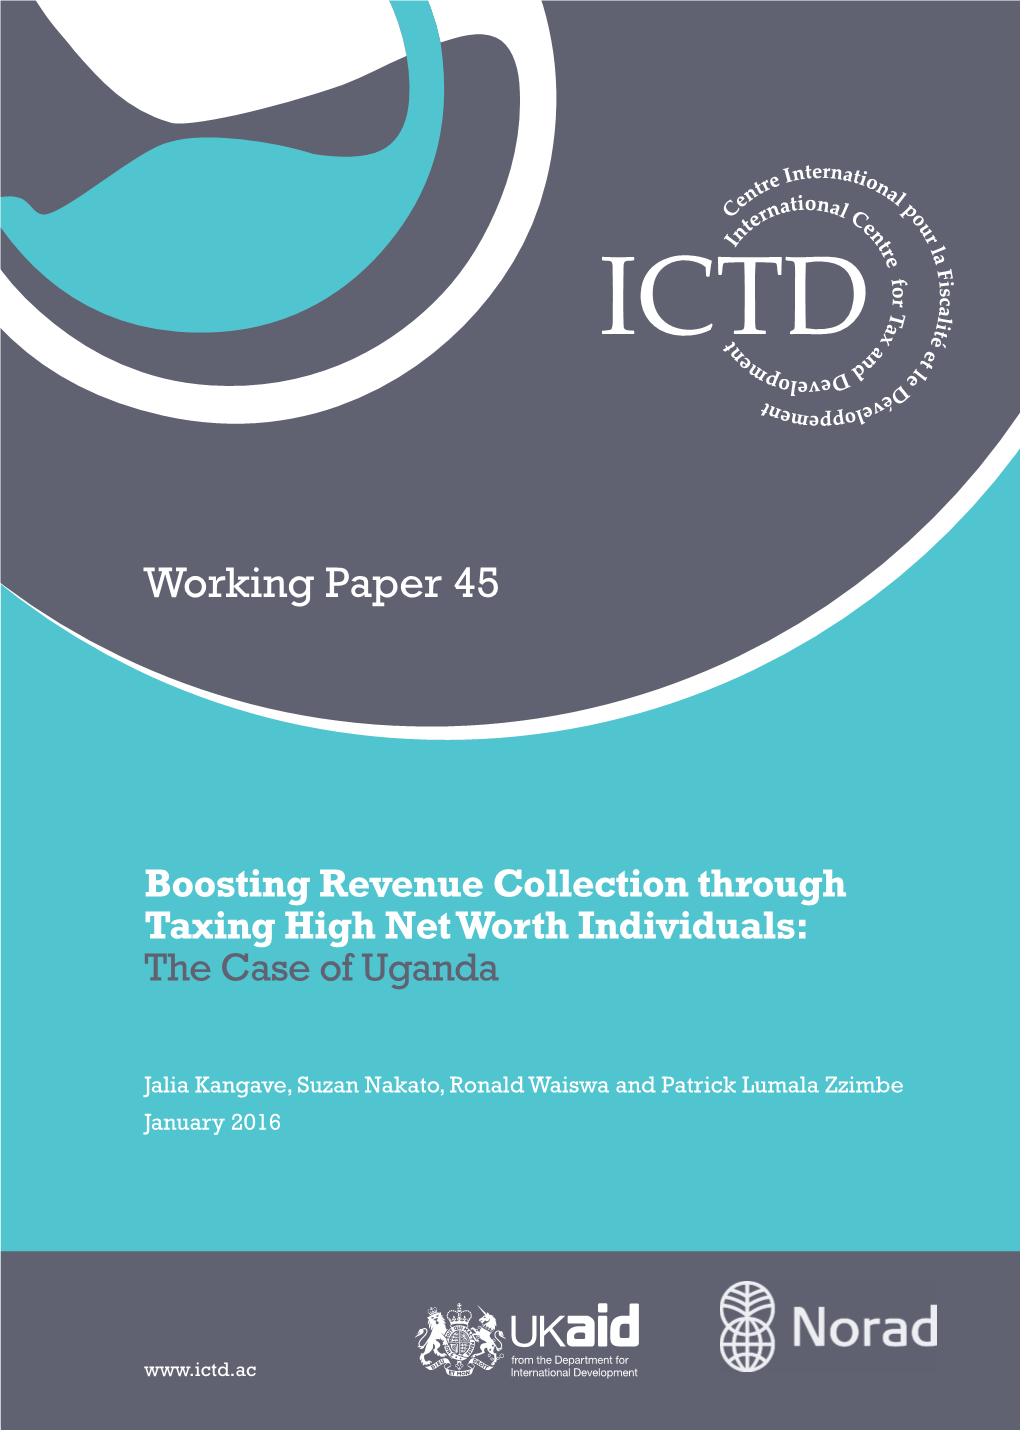 Boosting Revenue Collection Through Taxing High Net Worth Individuals: the Case of Uganda